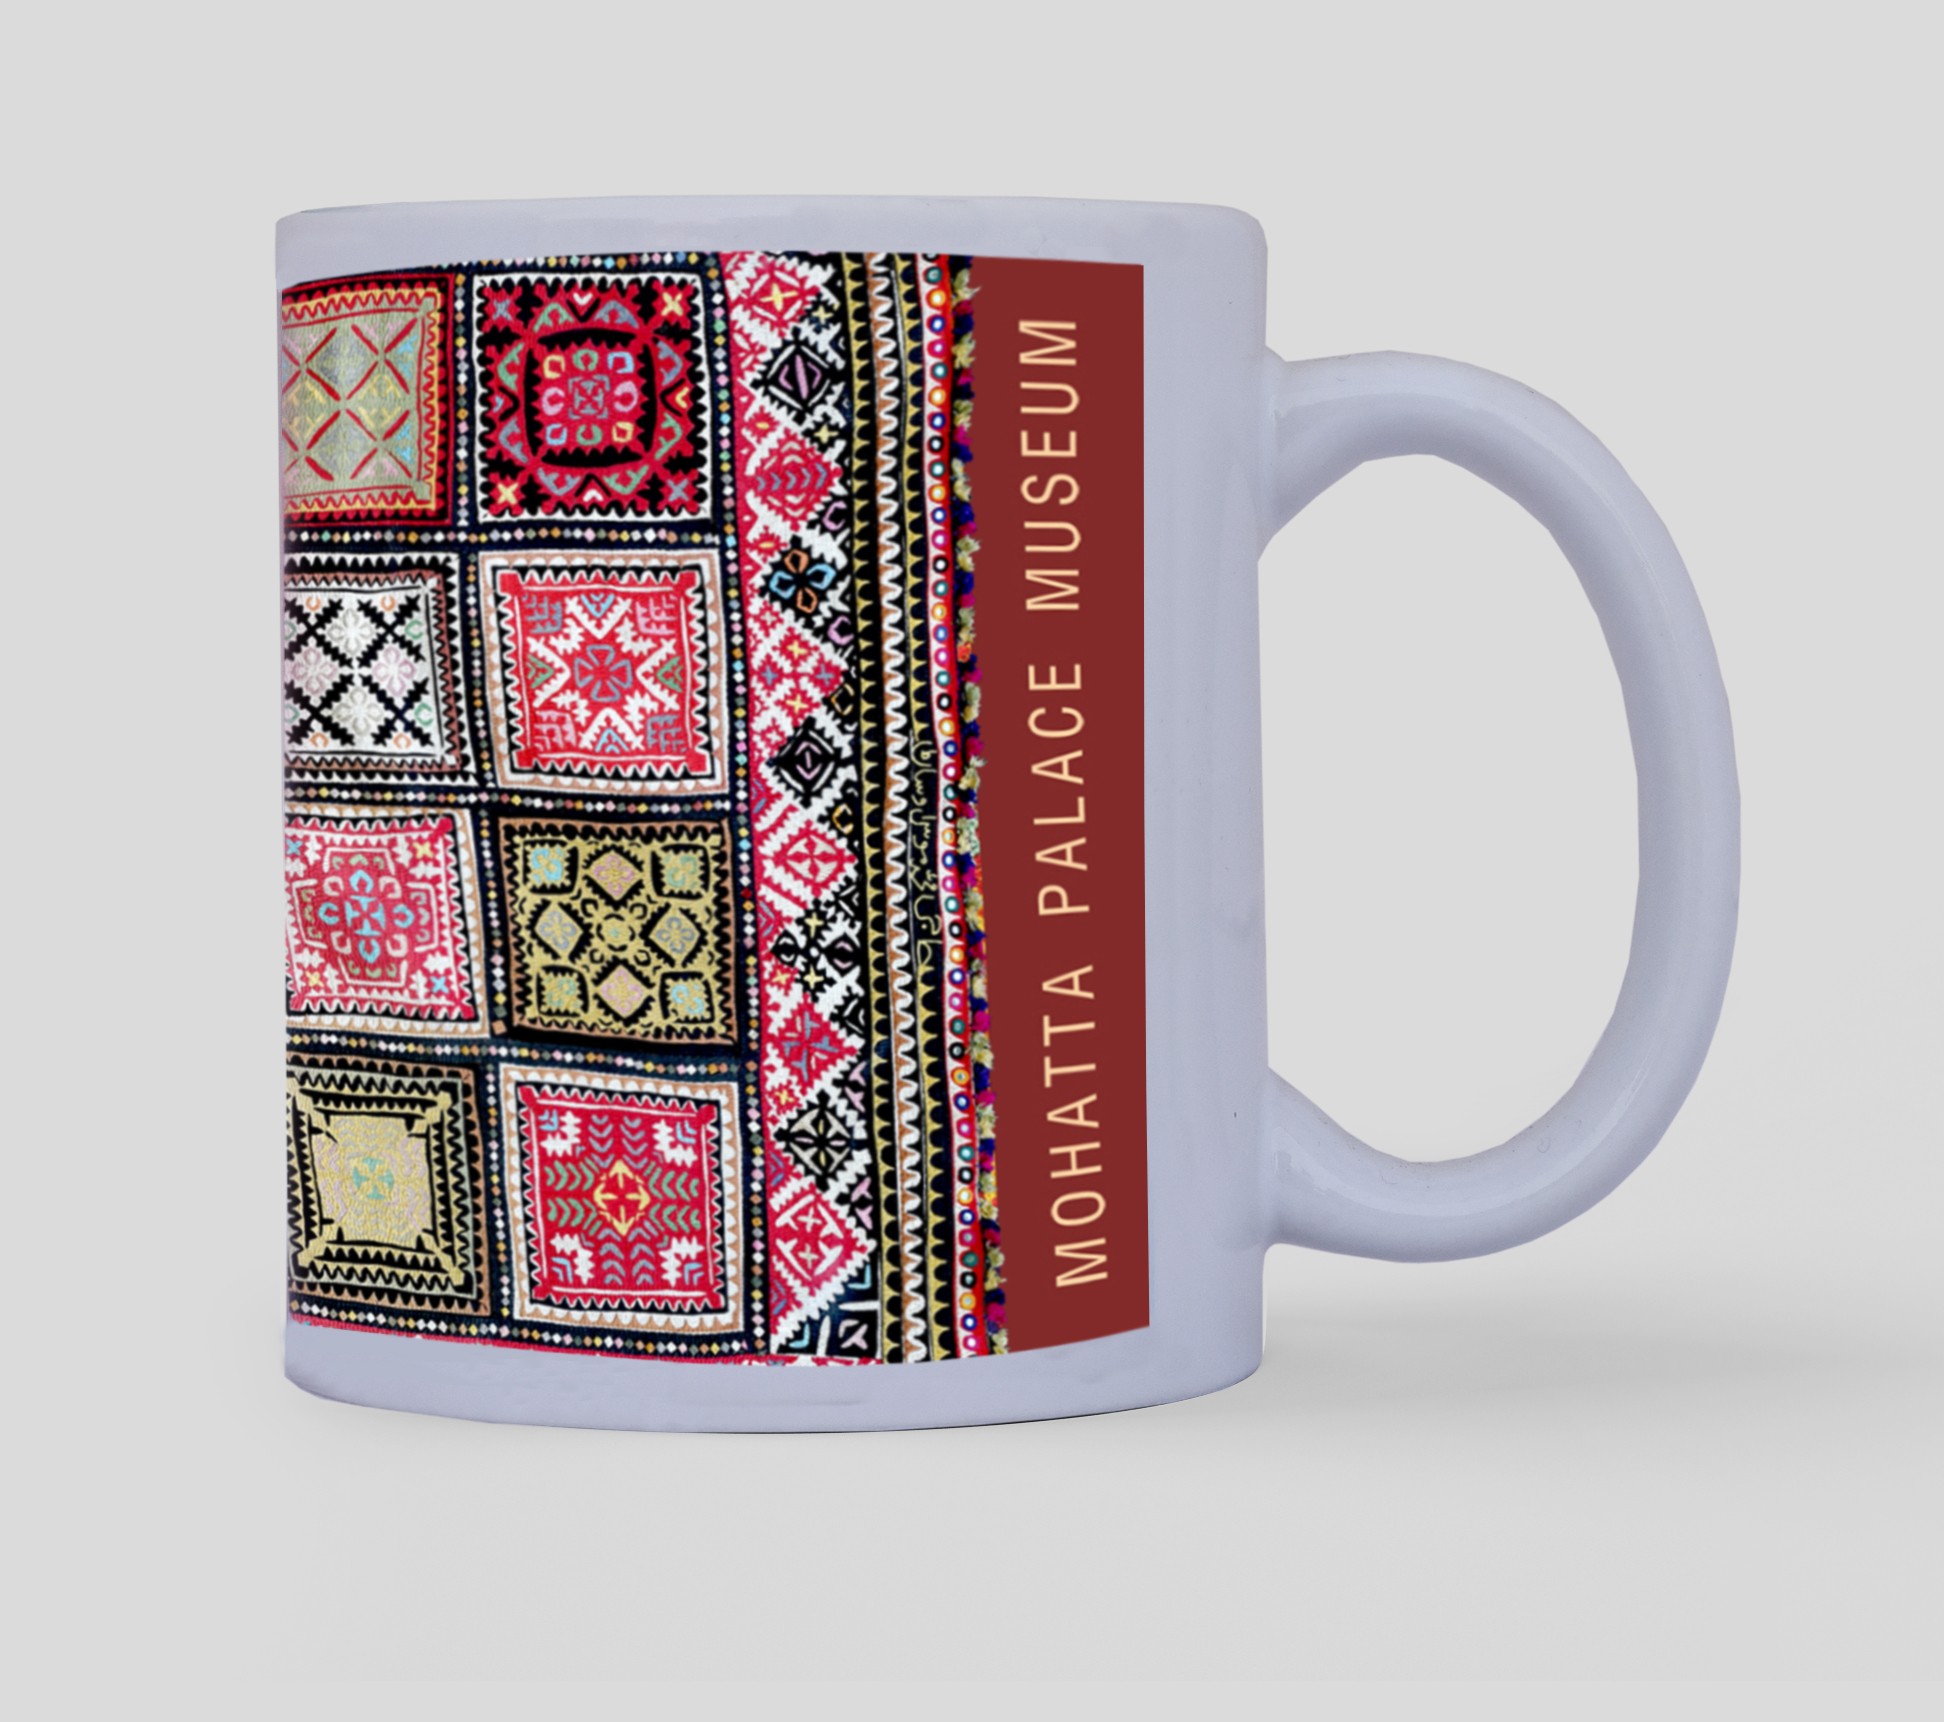 Mug with detail of a patchwork quilt, ralli, Hyderabad, Sindh